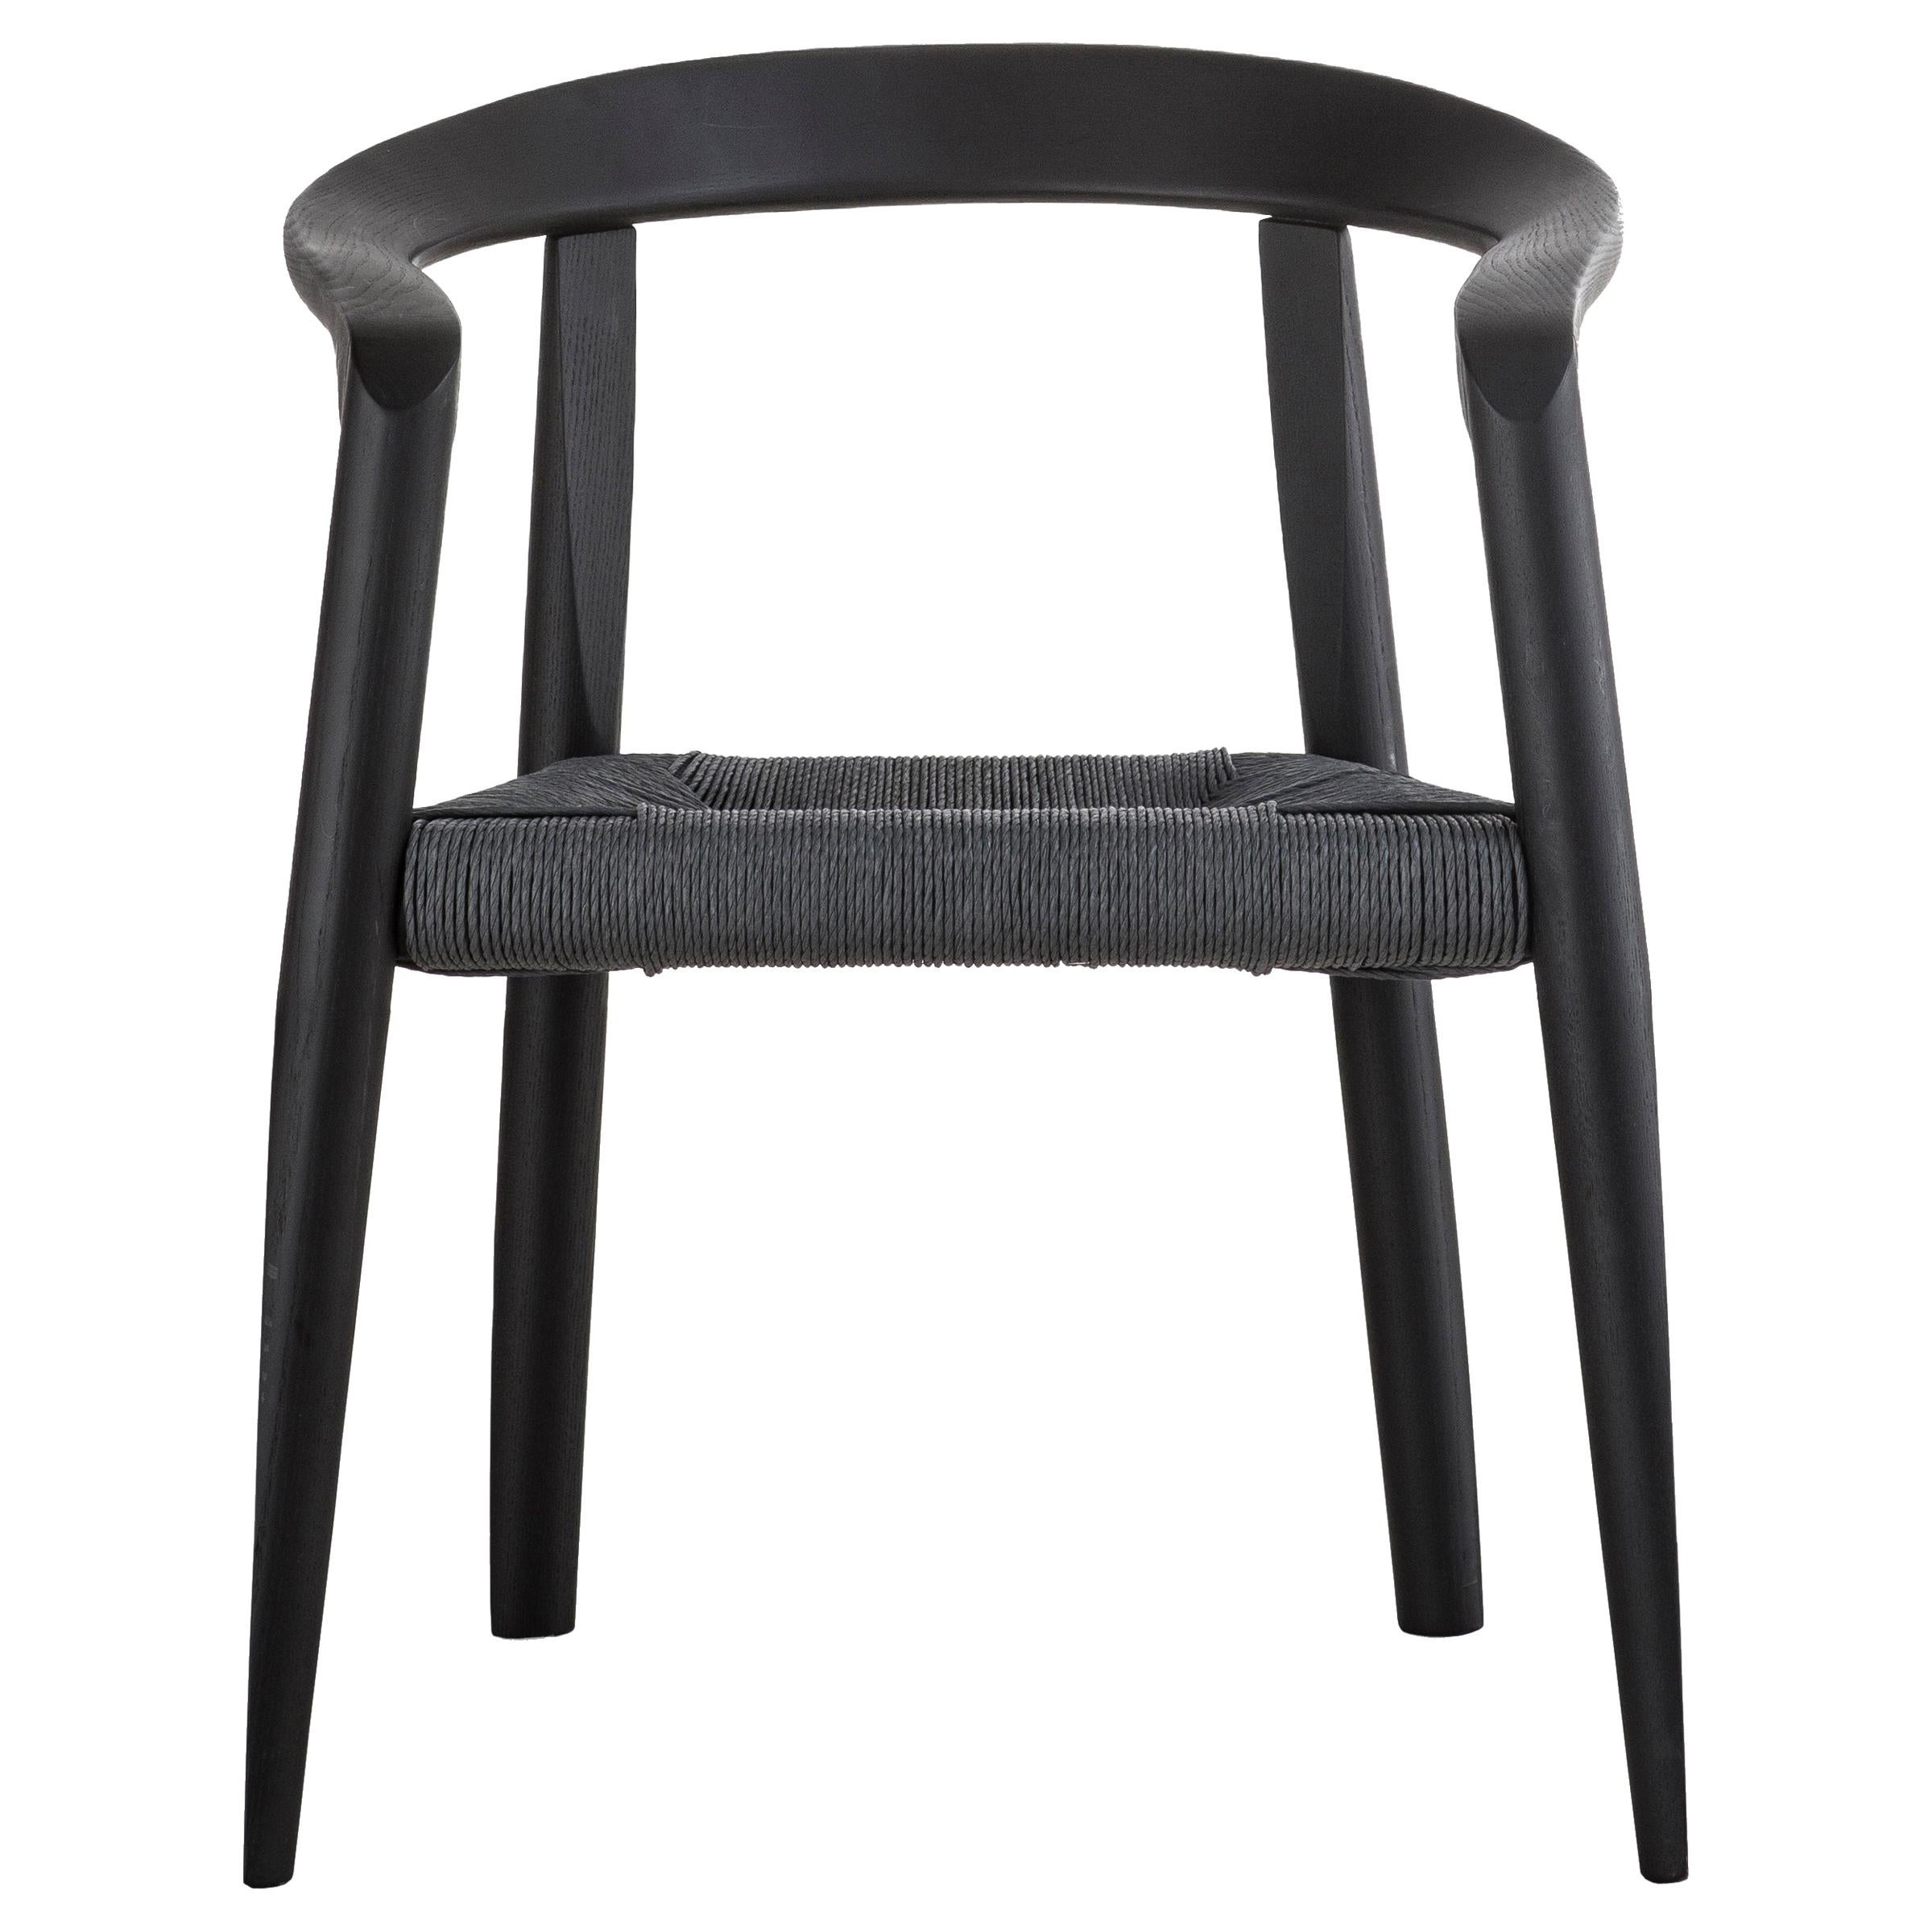 Woven Black Ash Wood Dining Chair Molteni&C by Tobia Scarpa - made in Italy